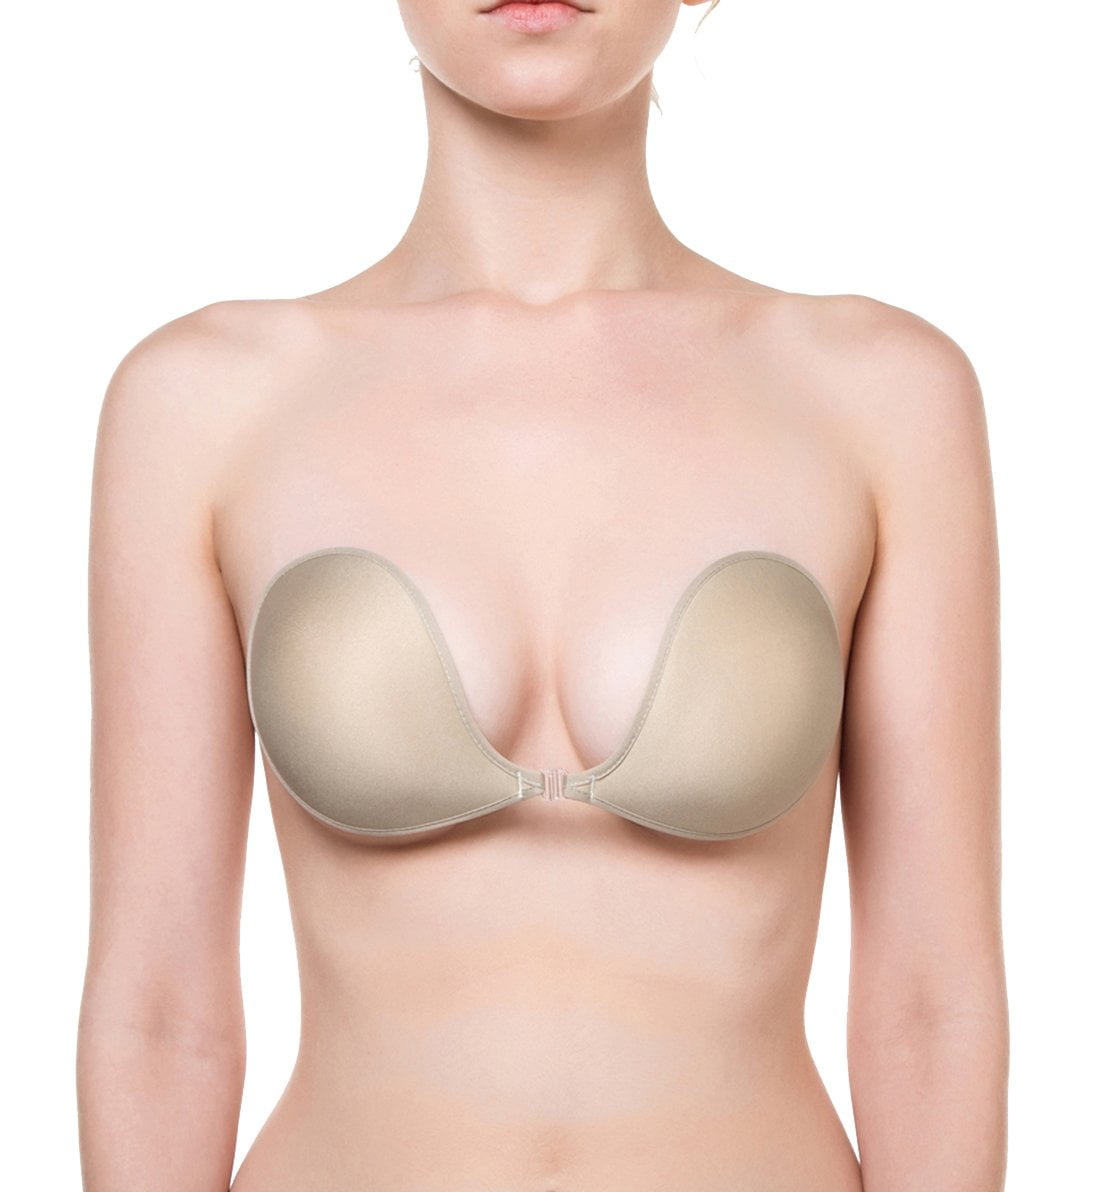 NuBra 3D Underwire Contour Silicone Adhesive Bra, Beige, Cup C,   price tracker / tracking,  price history charts,  price  watches,  price drop alerts